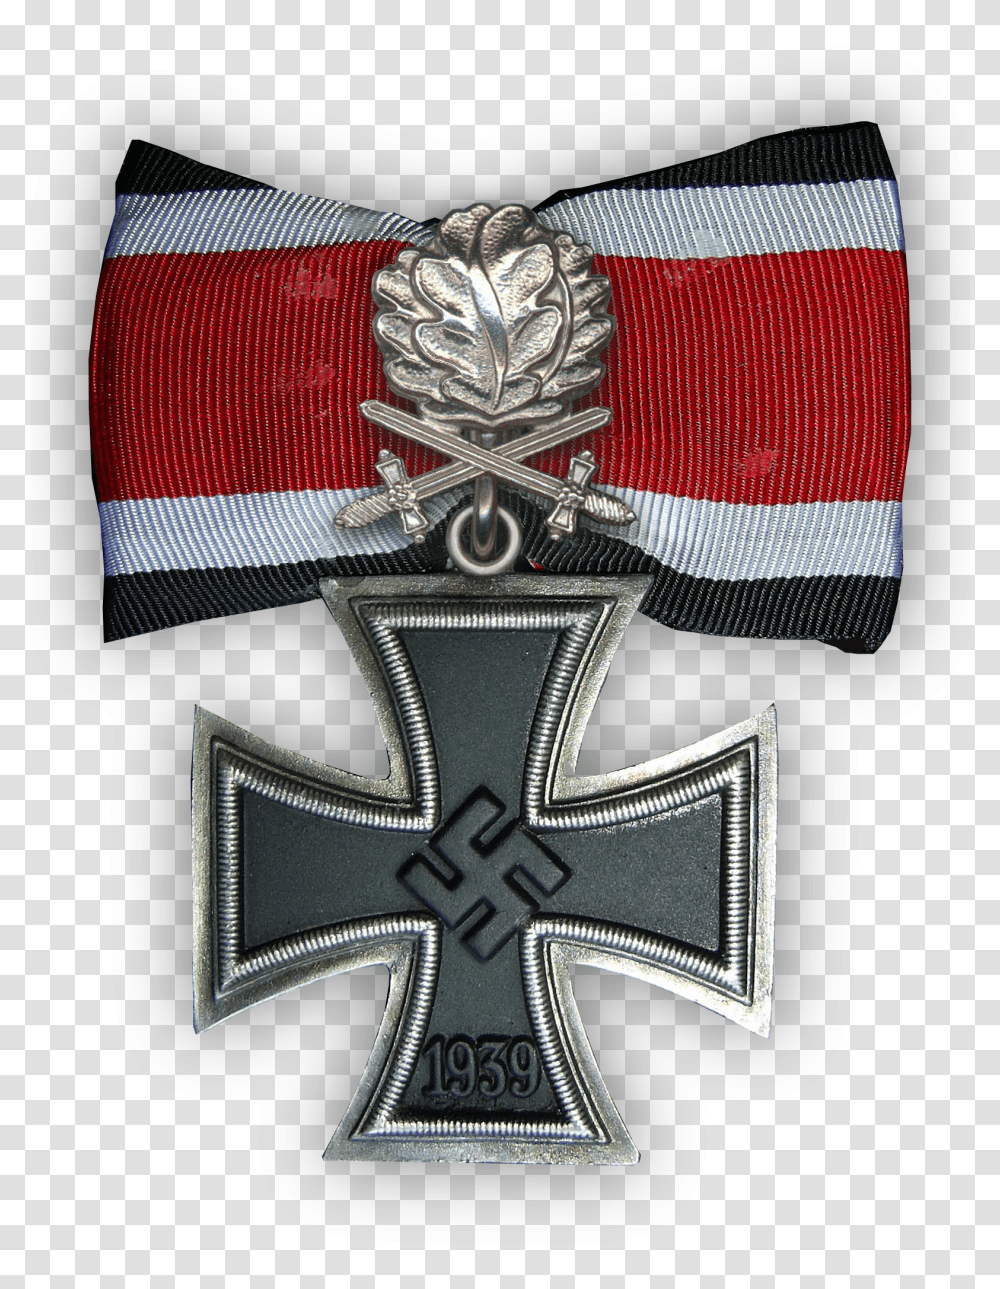 Knights Cross Of The Iron Cross Wikipedia Knight's Cross Of The Iron Cross, Logo, Trademark, Badge Transparent Png